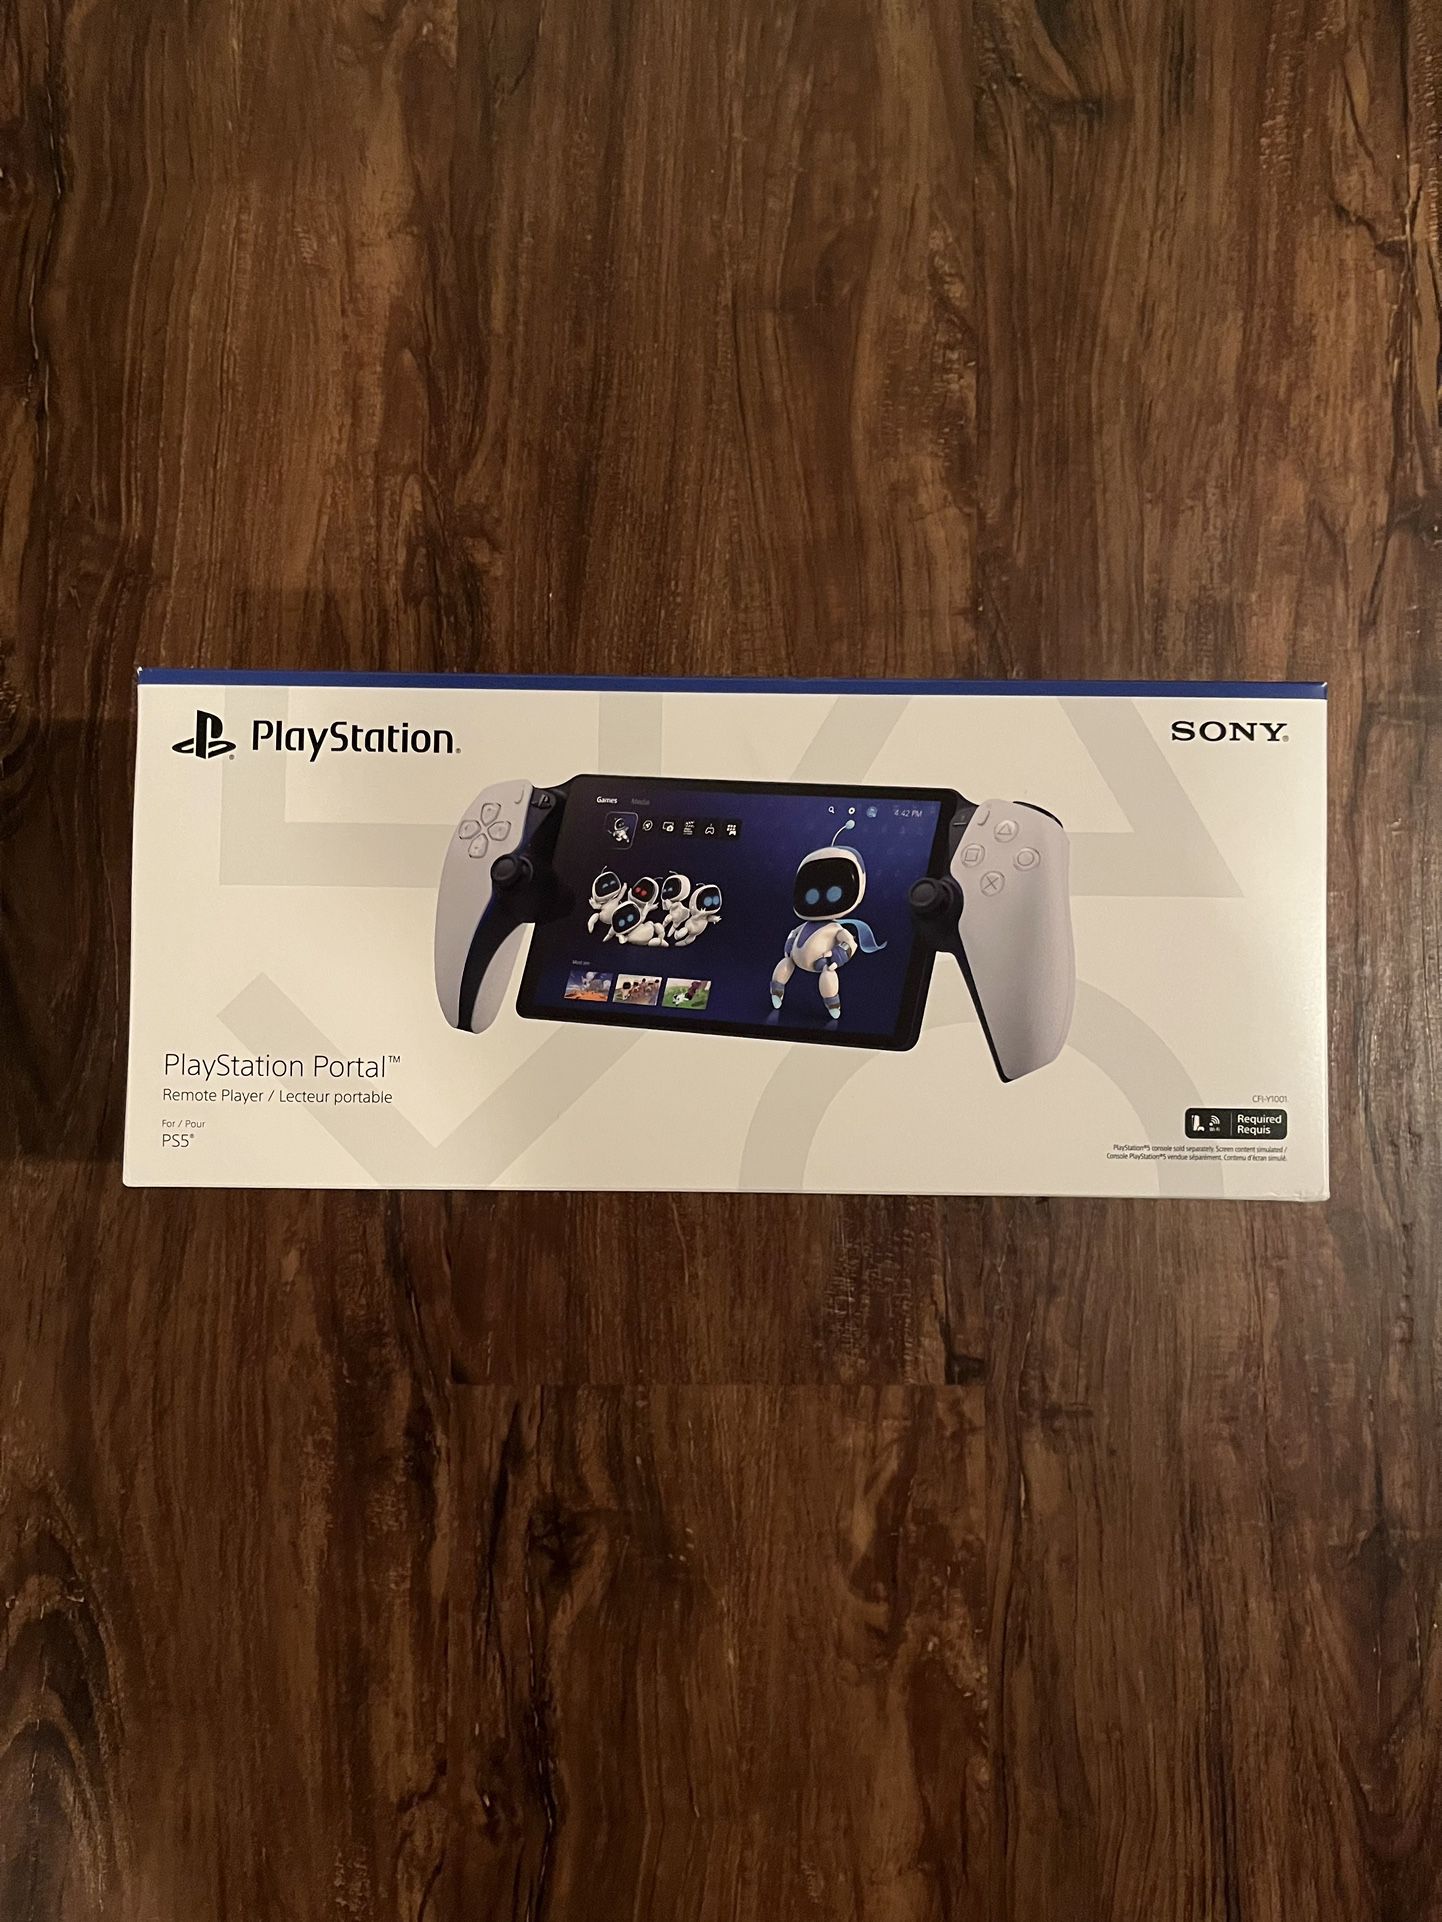 Sony PlayStation Portal Remote Player for Sale in Summit, NJ - OfferUp